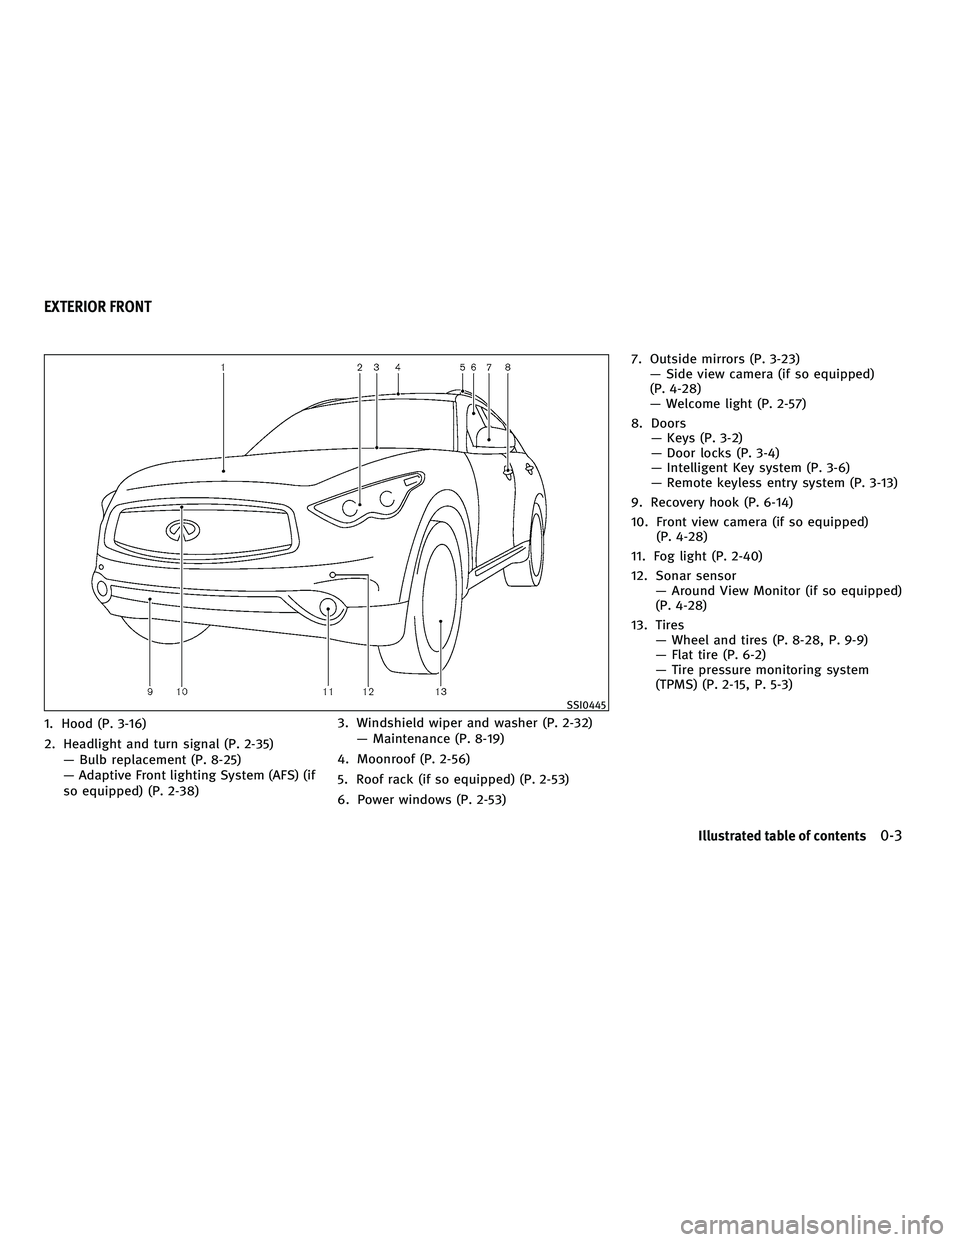 INFINITI FX 2010  Owners Manual 1. Hood (P. 3-16)
2. Headlight and turn signal (P. 2-35)— Bulb replacement (P. 8-25)
— Adaptive Front lighting System (AFS) (if
so equipped) (P. 2-38) 3. Windshield wiper and washer (P. 2-32)
— 